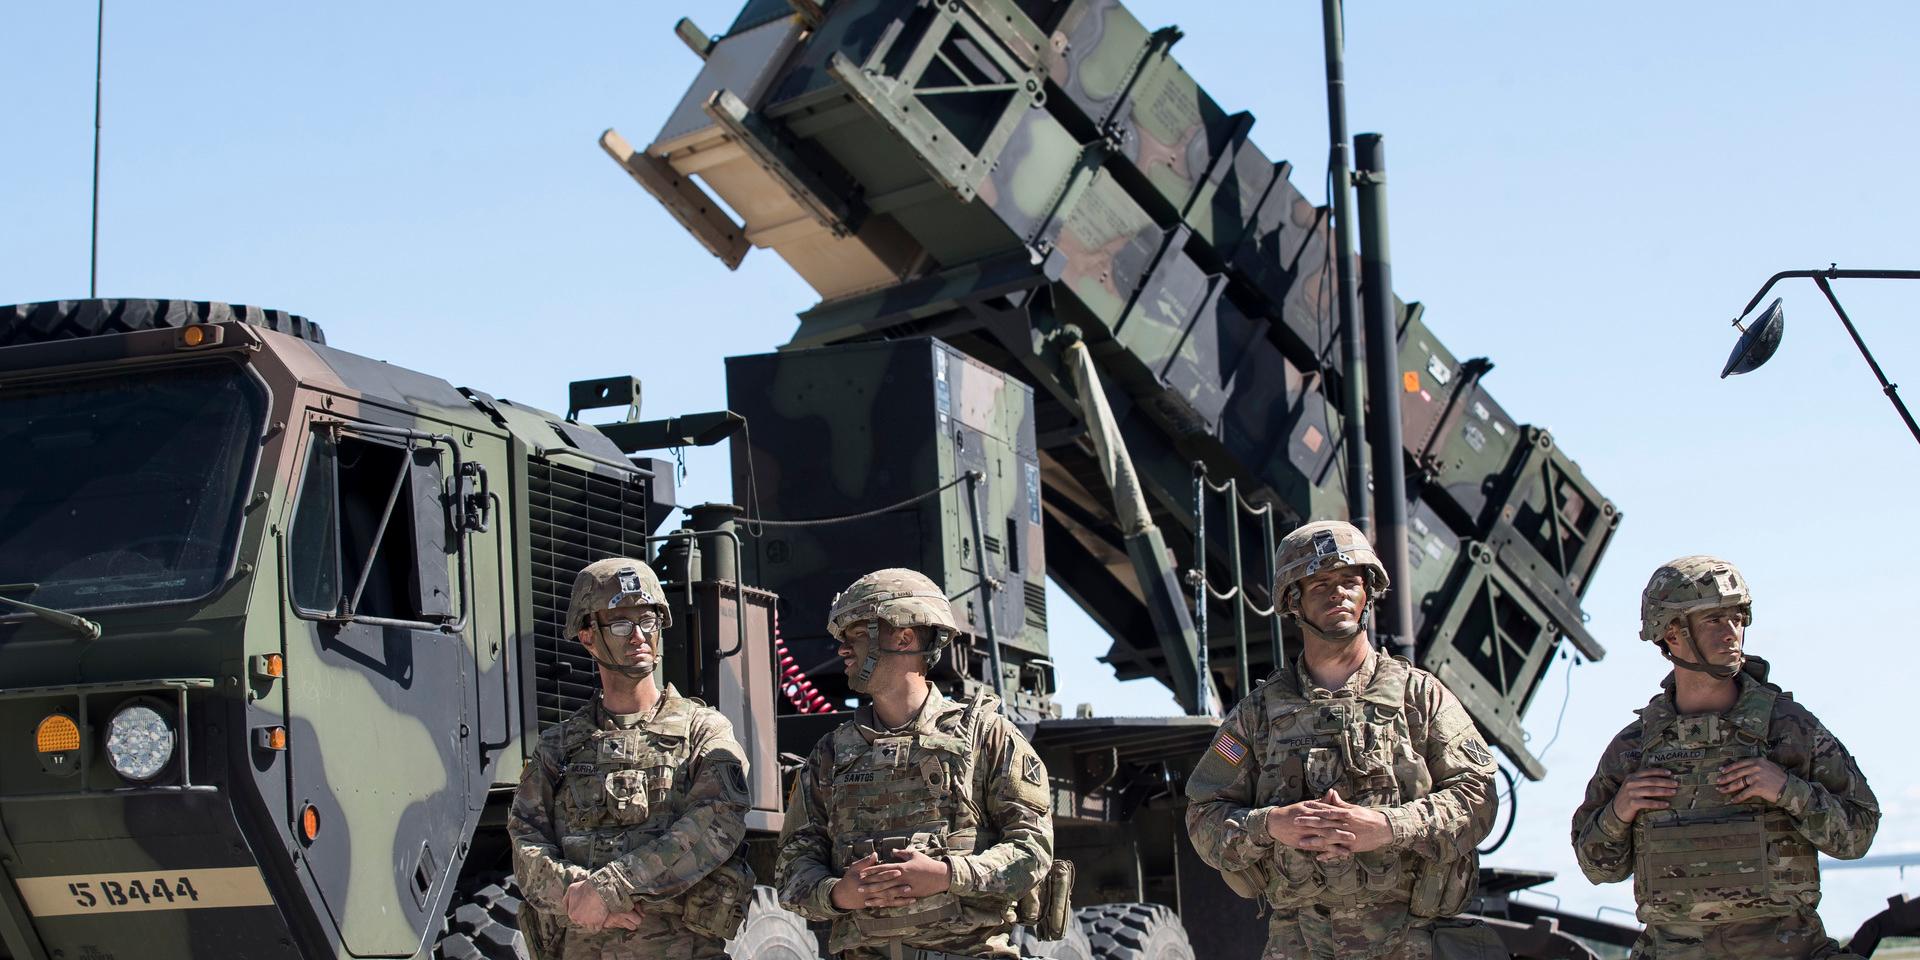 Members of US 10th Army Air and Missile Defense Command stands next to a Patriot surface-to-air missile battery during the NATO multinational ground based air defence units exercise "Tobruq Legacy 2017" at the Siauliai airbase some 230 km. (144 miles) east of the capital Vilnius, Lithuania, Thursday, July 20, 2017.  The July deployment of US Patriot long-range missile system in Lithuania, demonstrates commitment to the security of Lithuania and adds to the strategic capabilities of the region. ((AP Photo/Mindaugas Kulbis)